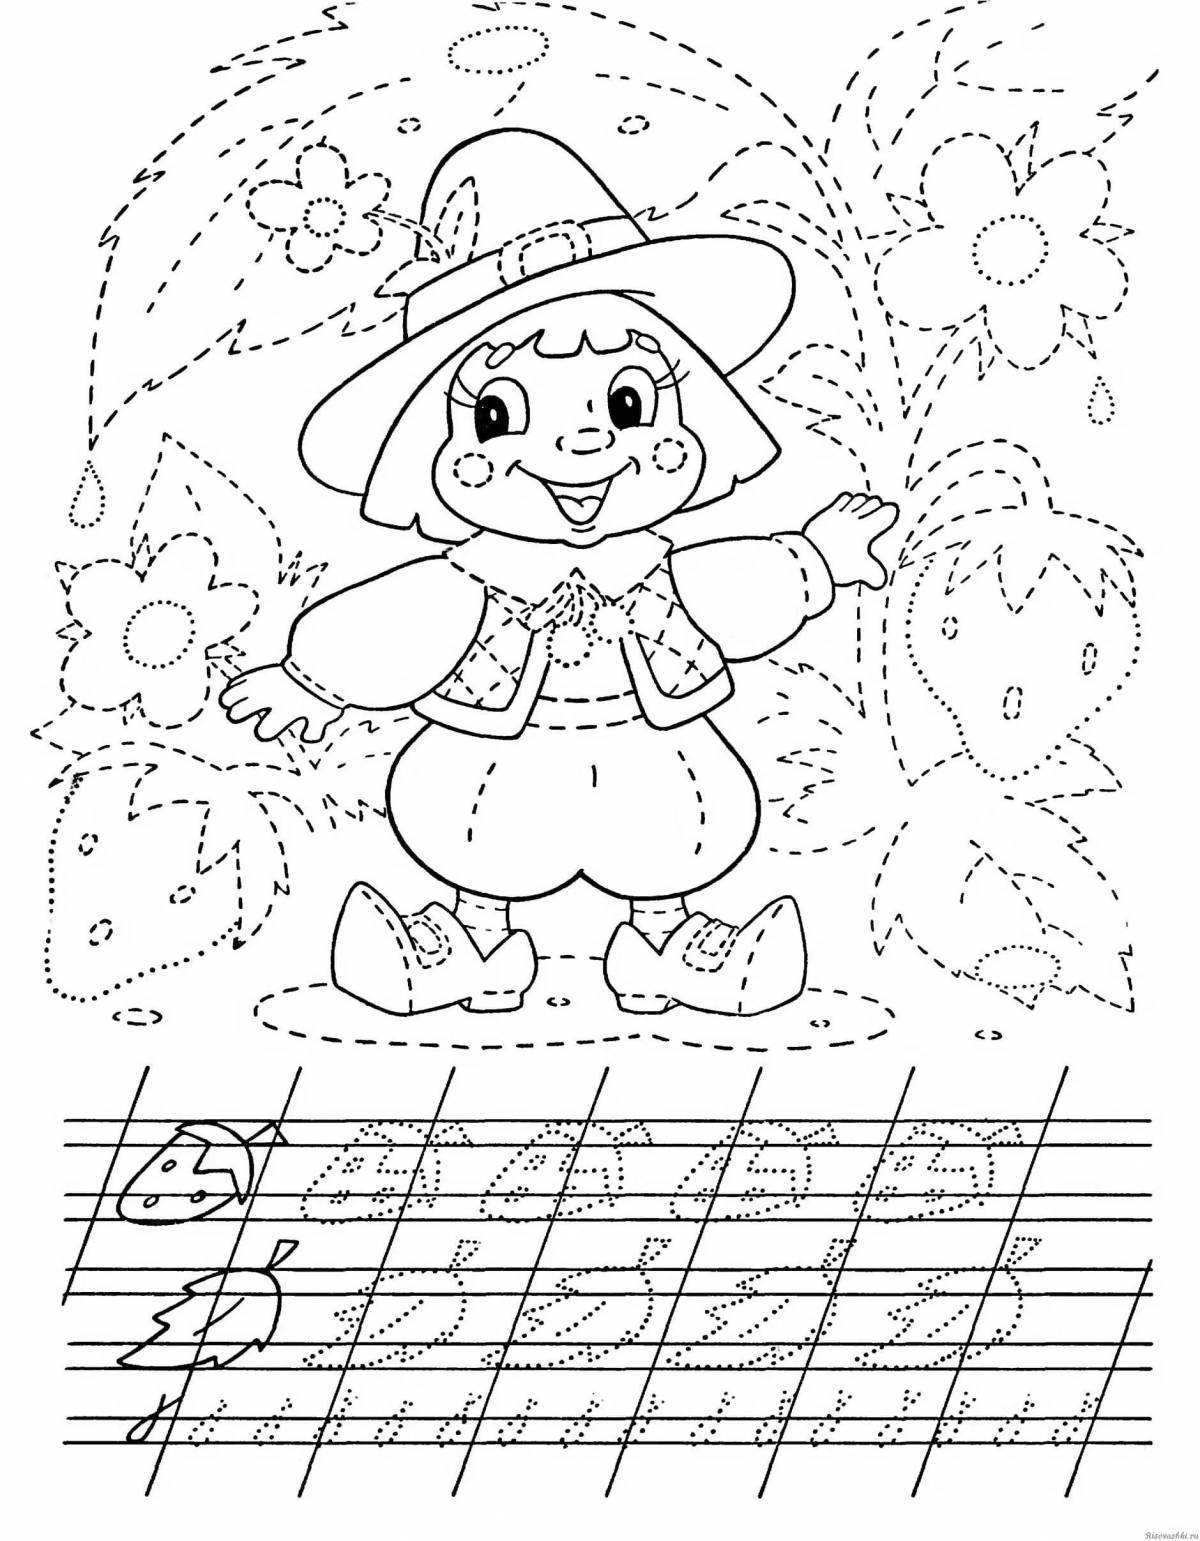 Colour educational coloring book for girls 5-6 years old